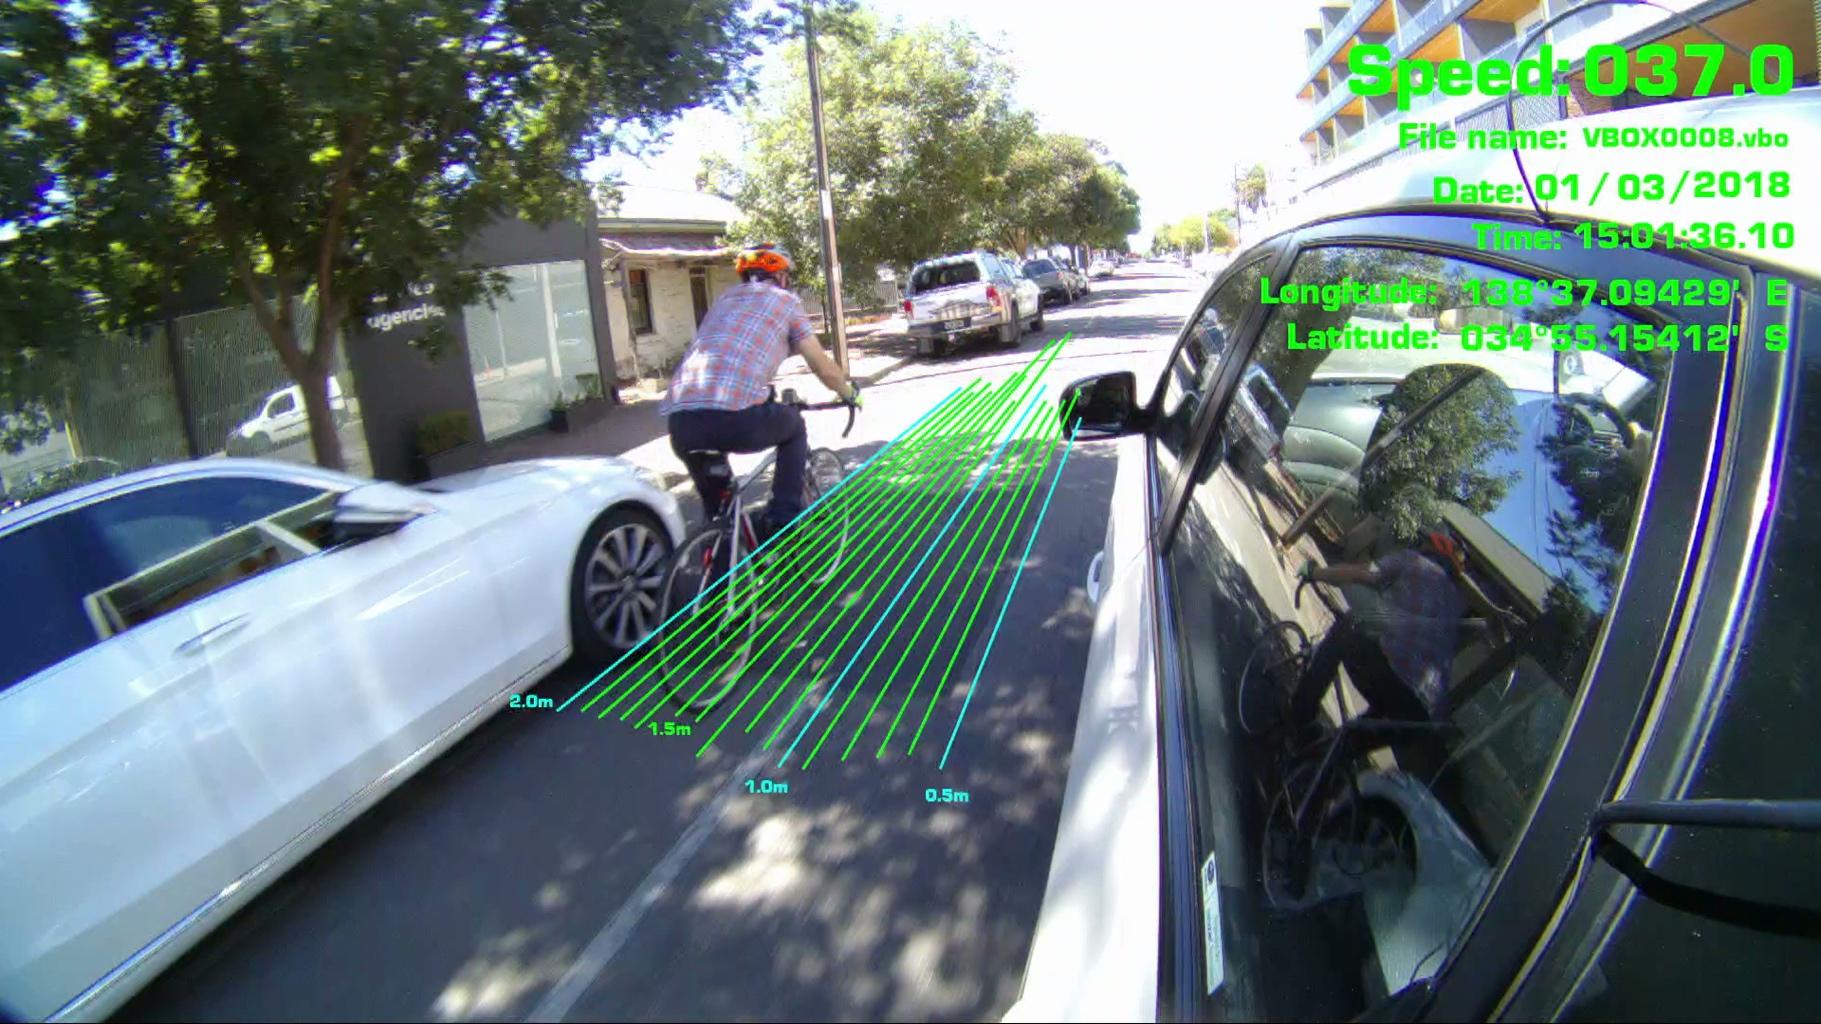 Image of a bicycle being passed by a instrumented vehicle with details of distance to bicycle